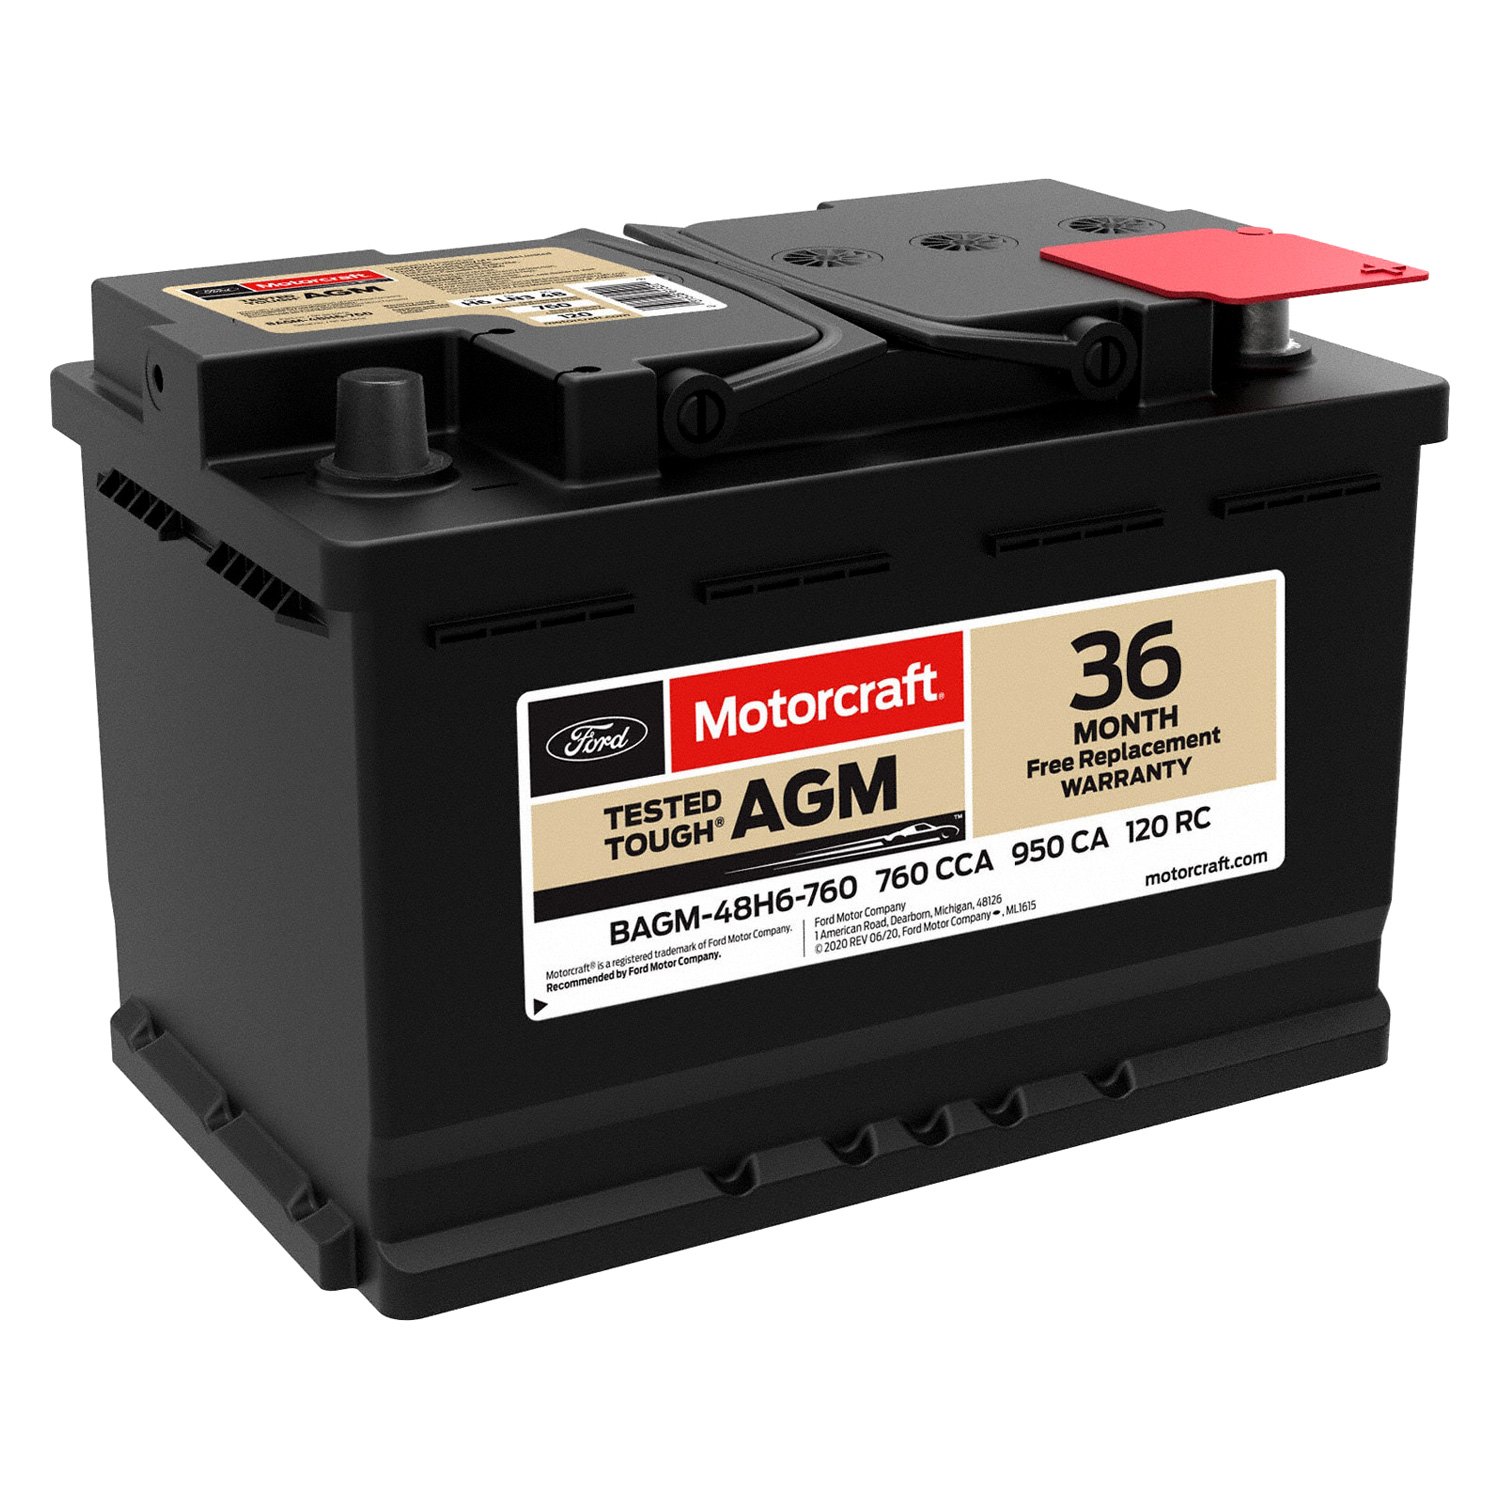 motorcraft-ford-f-150-2017-tested-tough-max-agm-battery